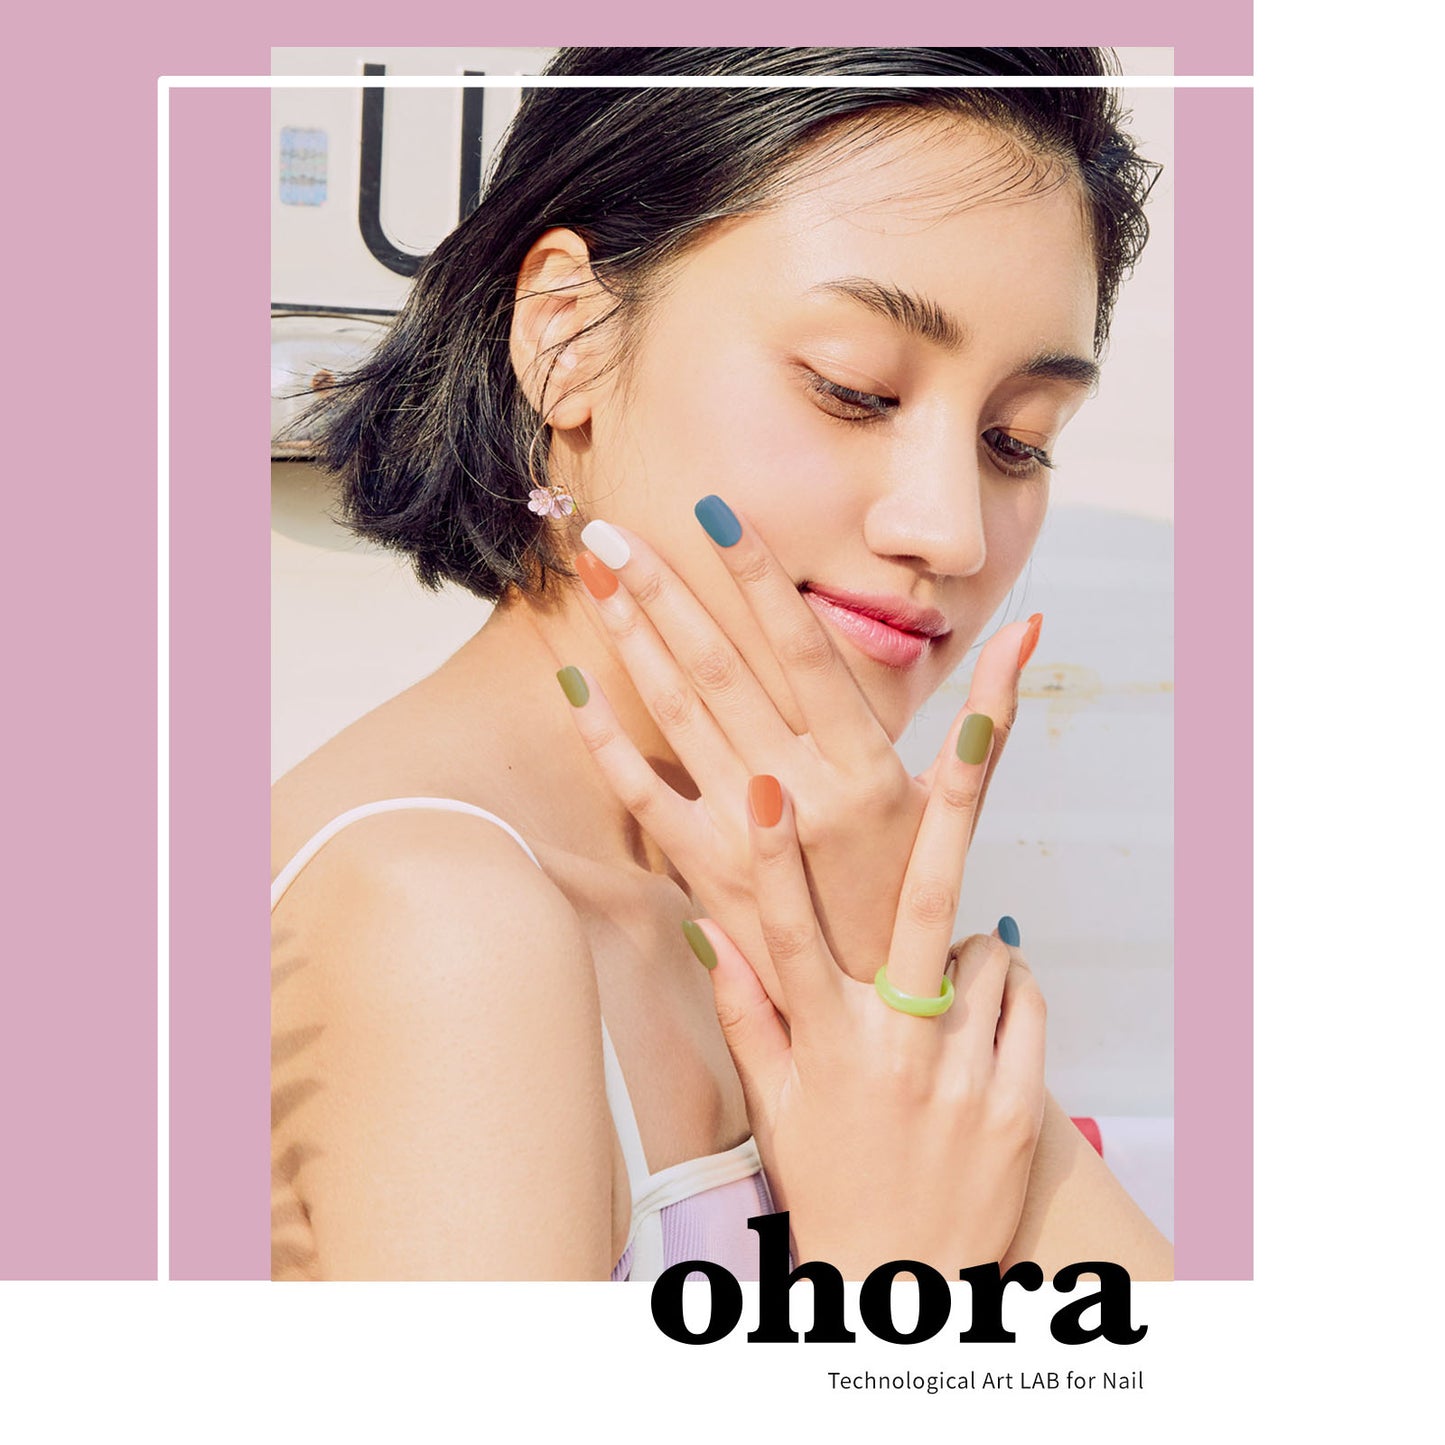 Ohora (N Jelly Bean Nails)